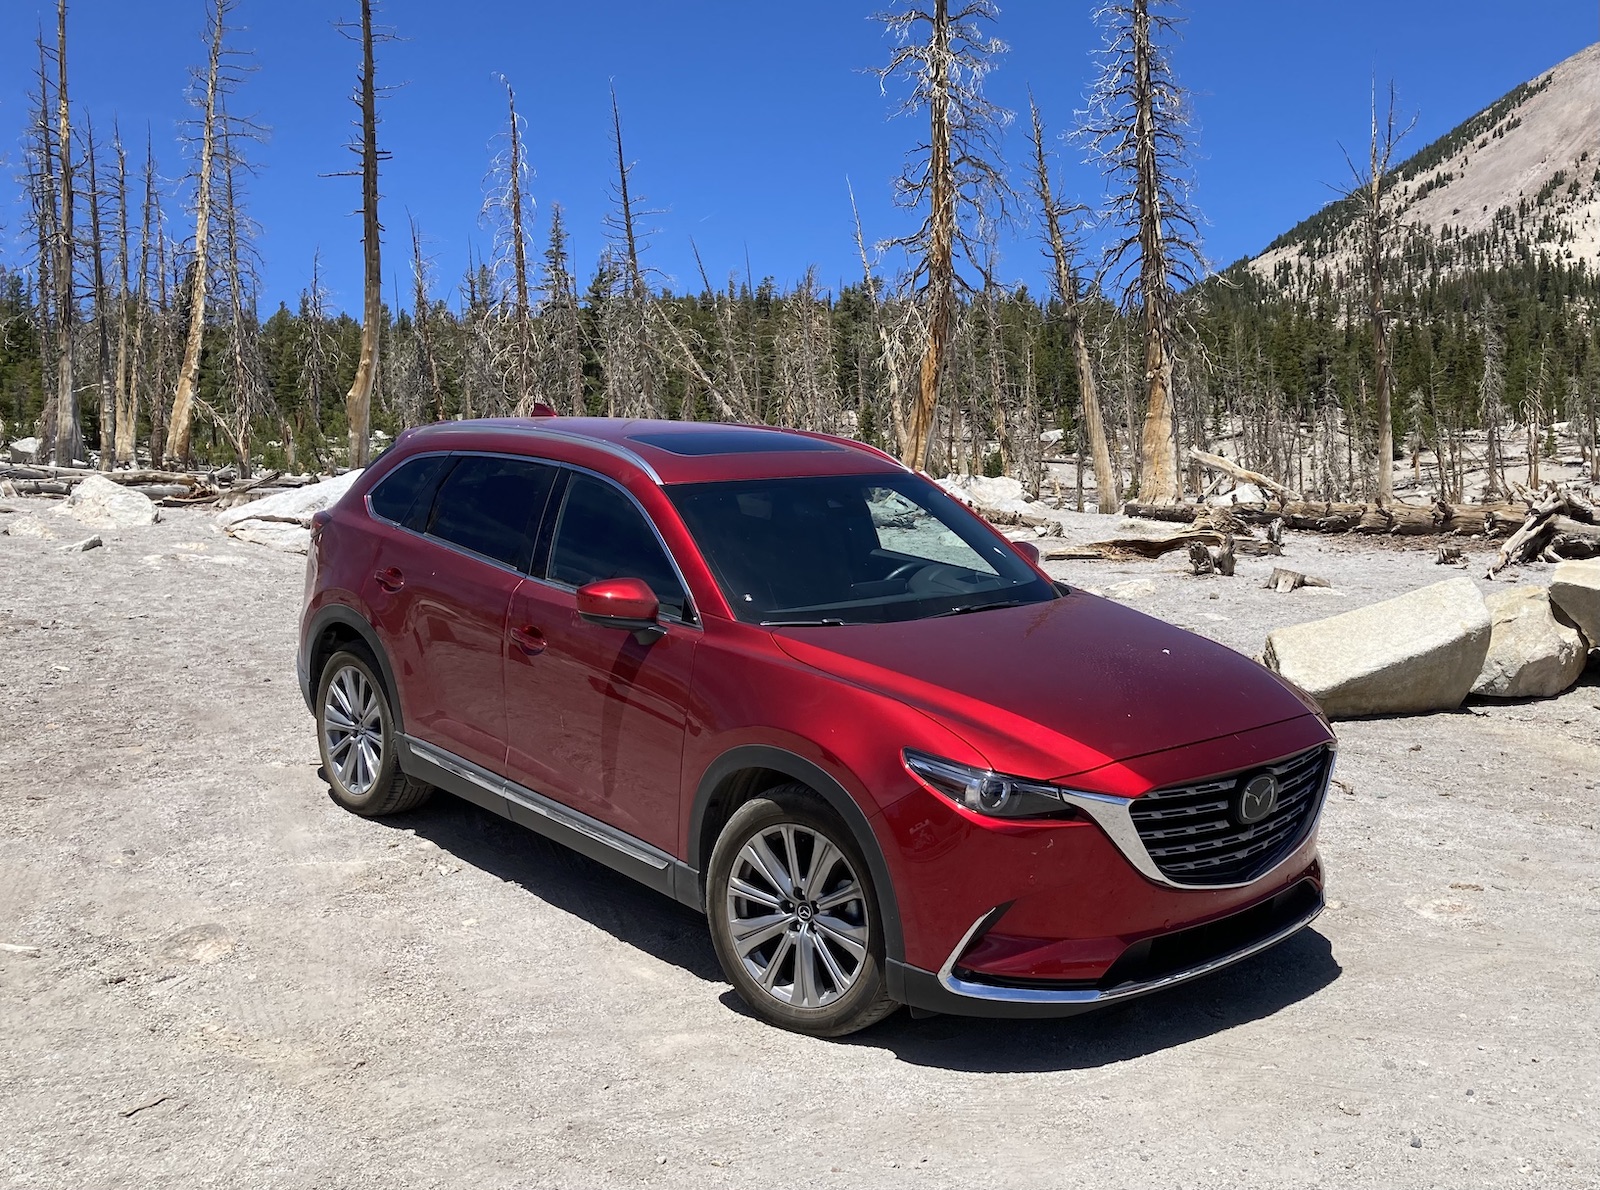 Mazda CX-9 Signature AWD: DRIVING TO JUNE LAKE, CA – IN JULY